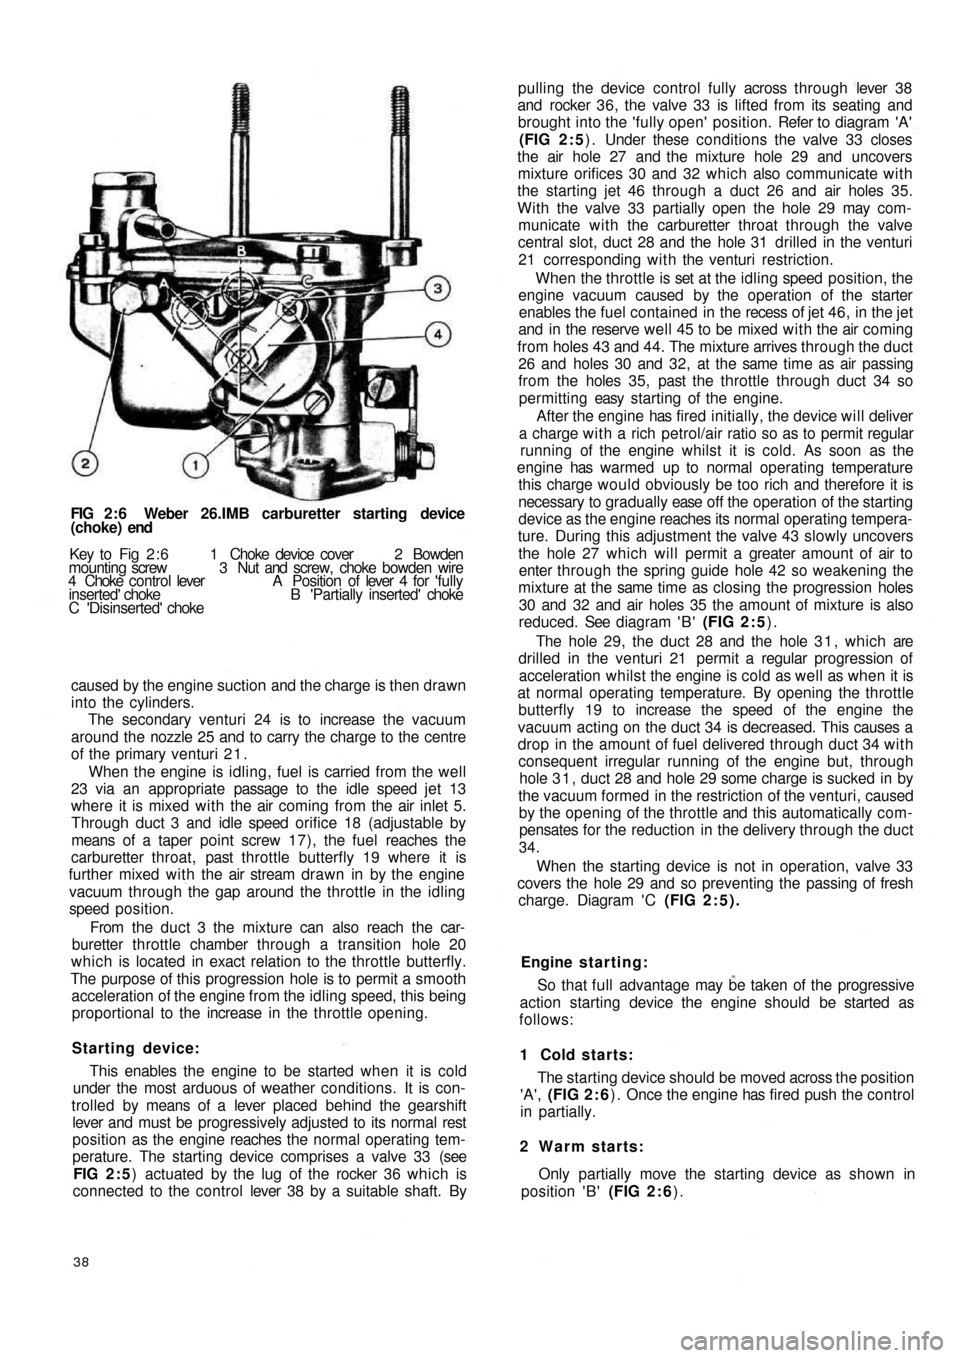 FIAT 500 1957 1.G Workshop Manual FIG 2 : 6  Weber 26.IMB carburetter starting device
(choke) end
Key  to   Fig   2 : 6   1   Choke  device  cover   2  Bowden
mounting screw  3  Nut and screw, choke bowden wire
4  Choke  control lever